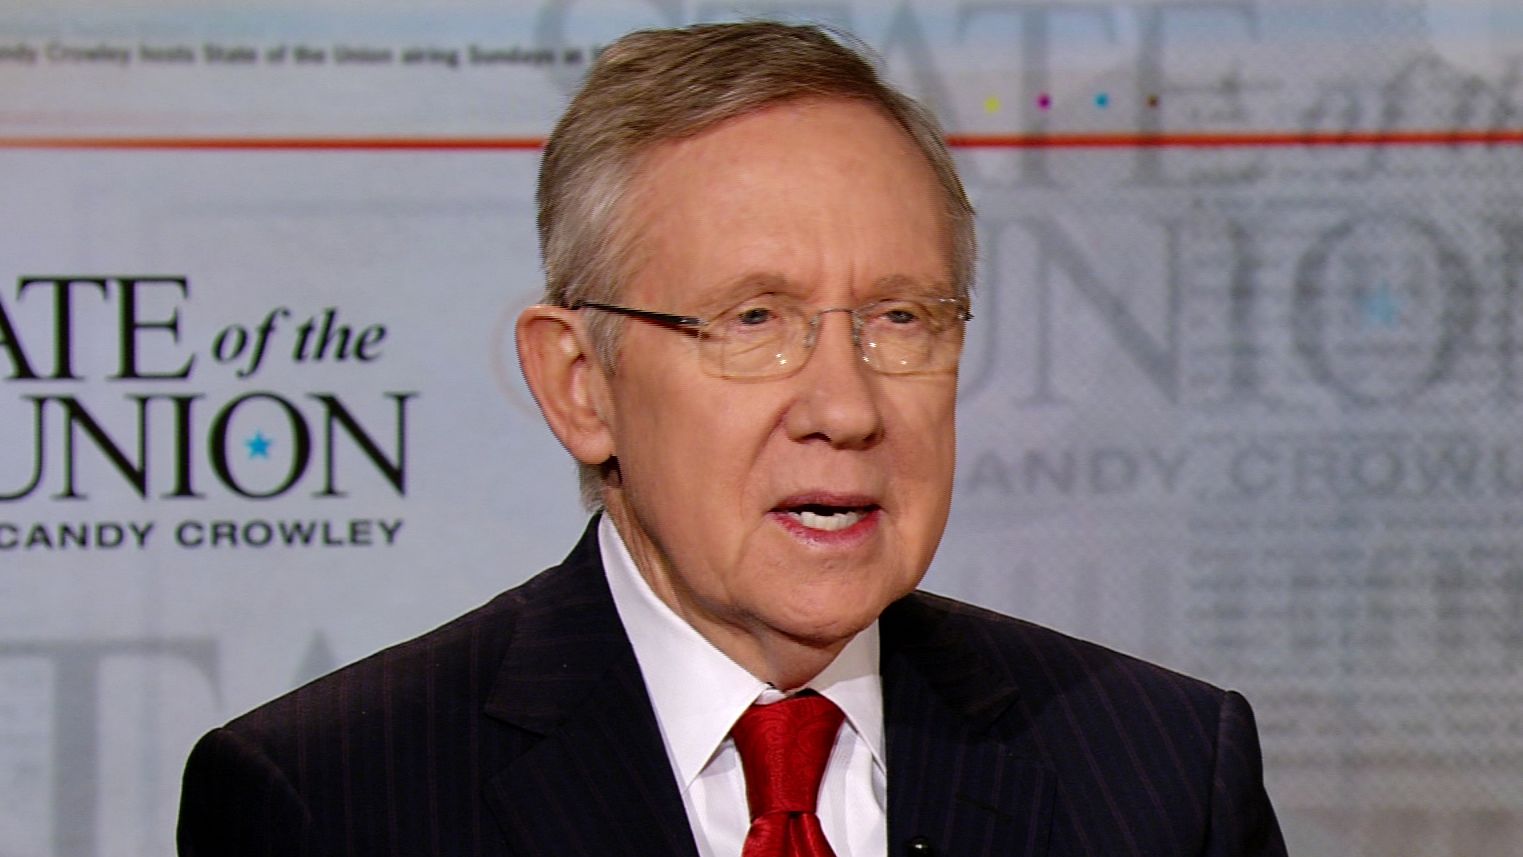 Senate Majority Leader Harry Reid, D-Nevada, urged the House to pass the transportation bill quickly.